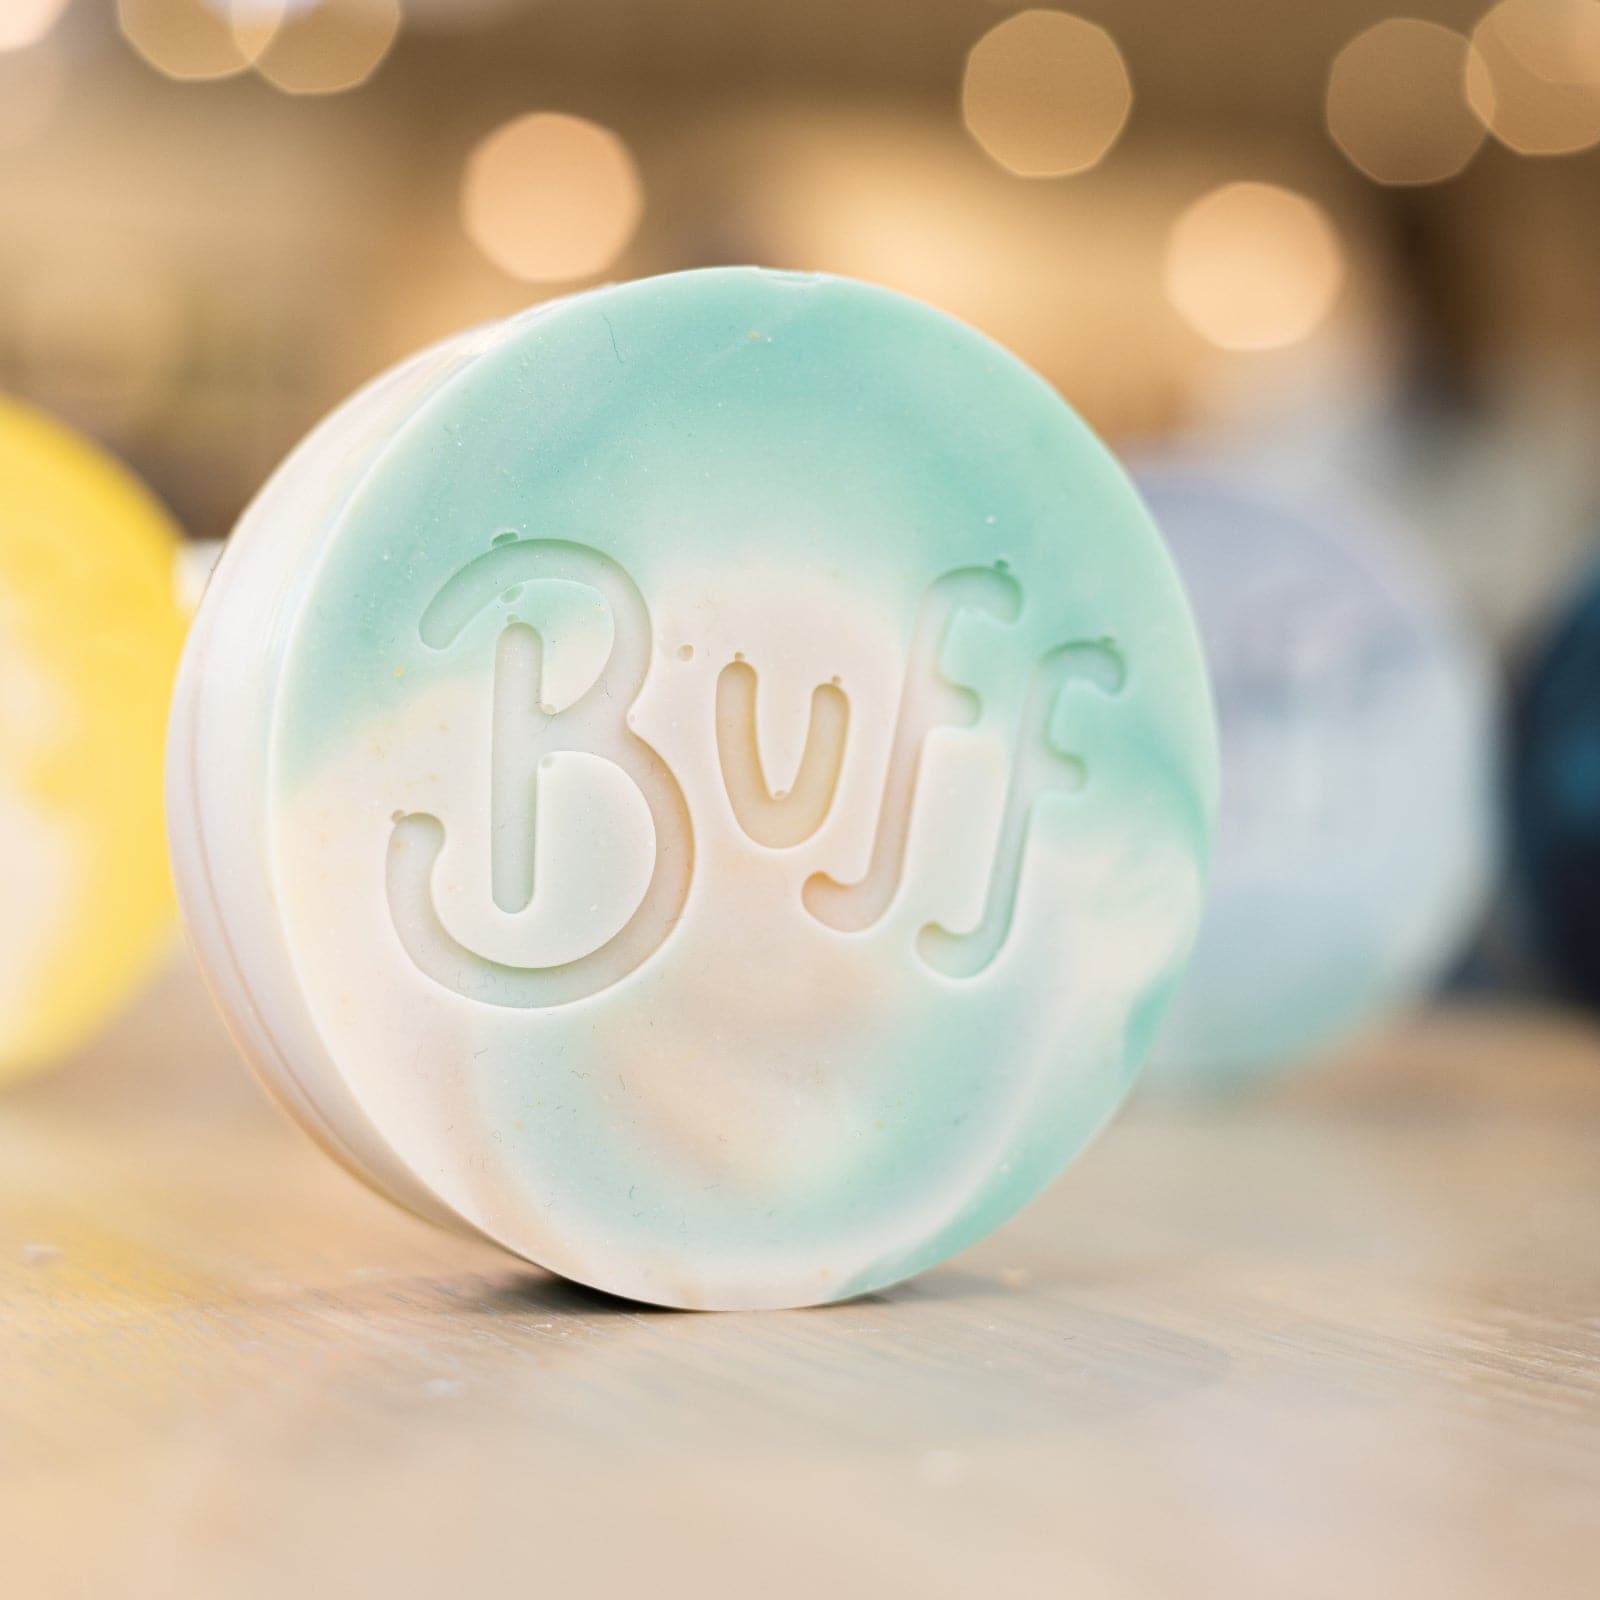 angled right view of teal and white Narcissist Shave Bar with "Buff" engraved in bar